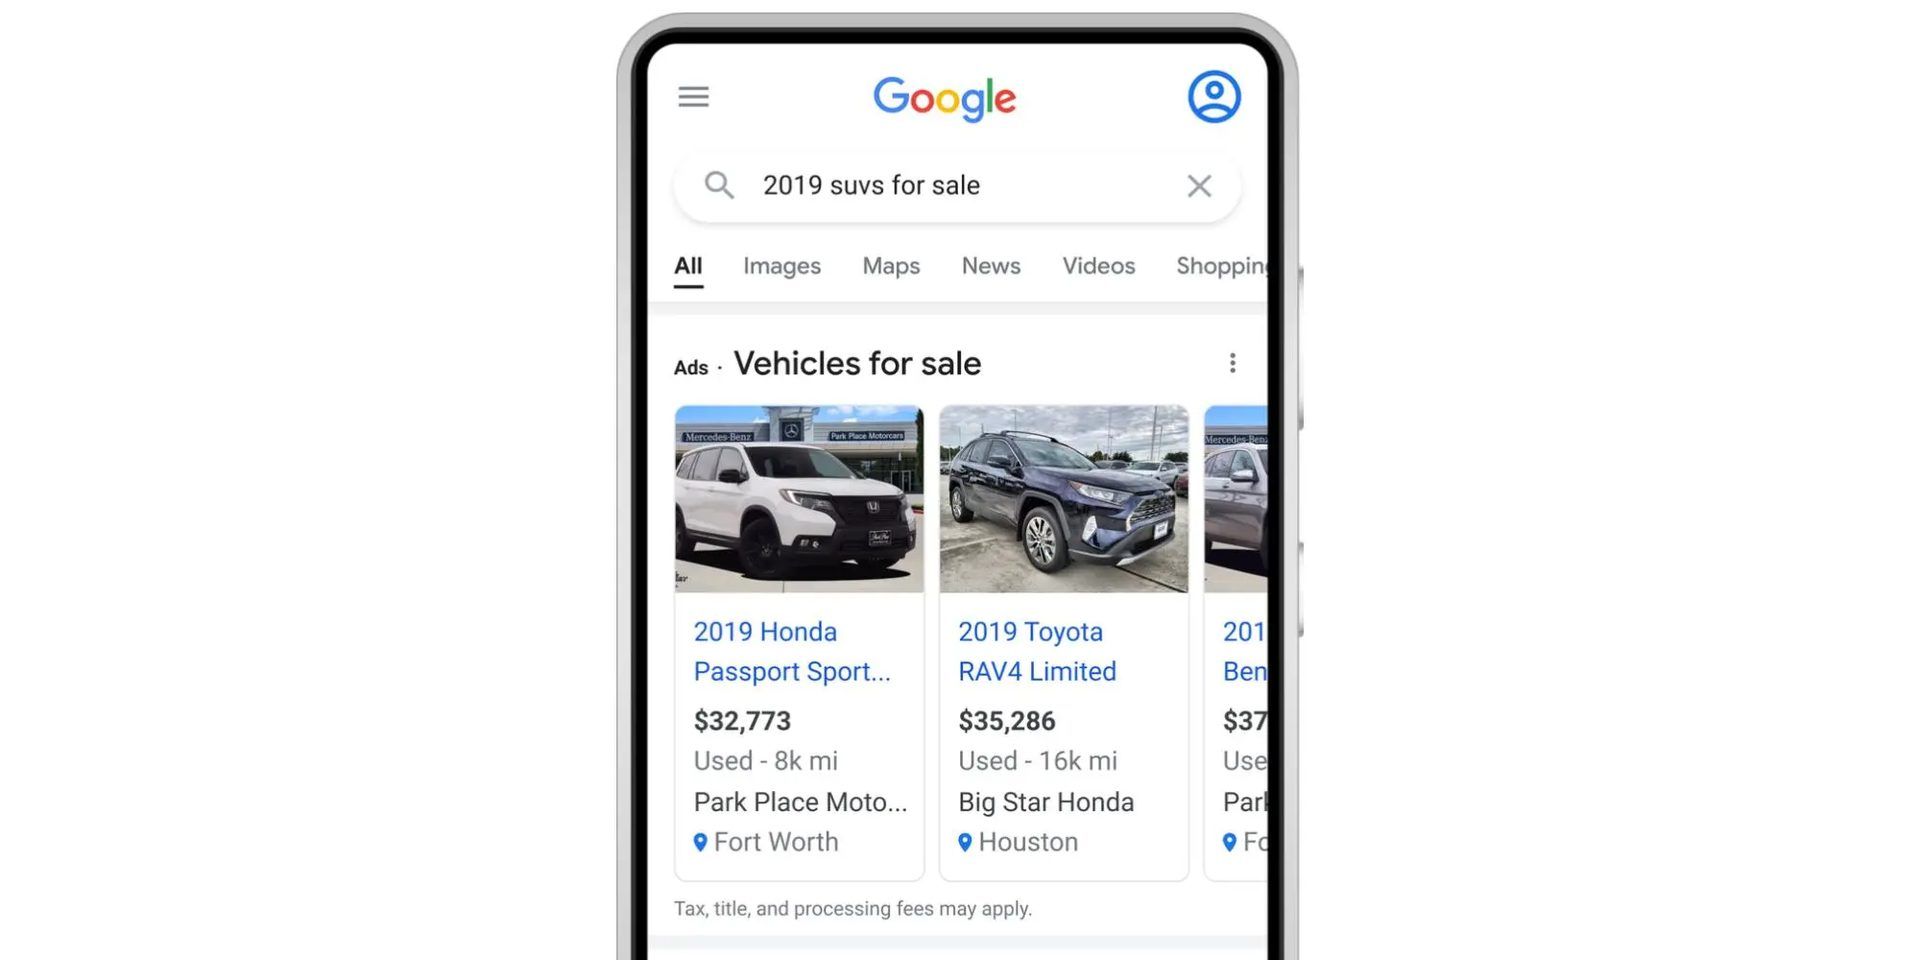 Selling cars becomes easier with Google vehicles for sale